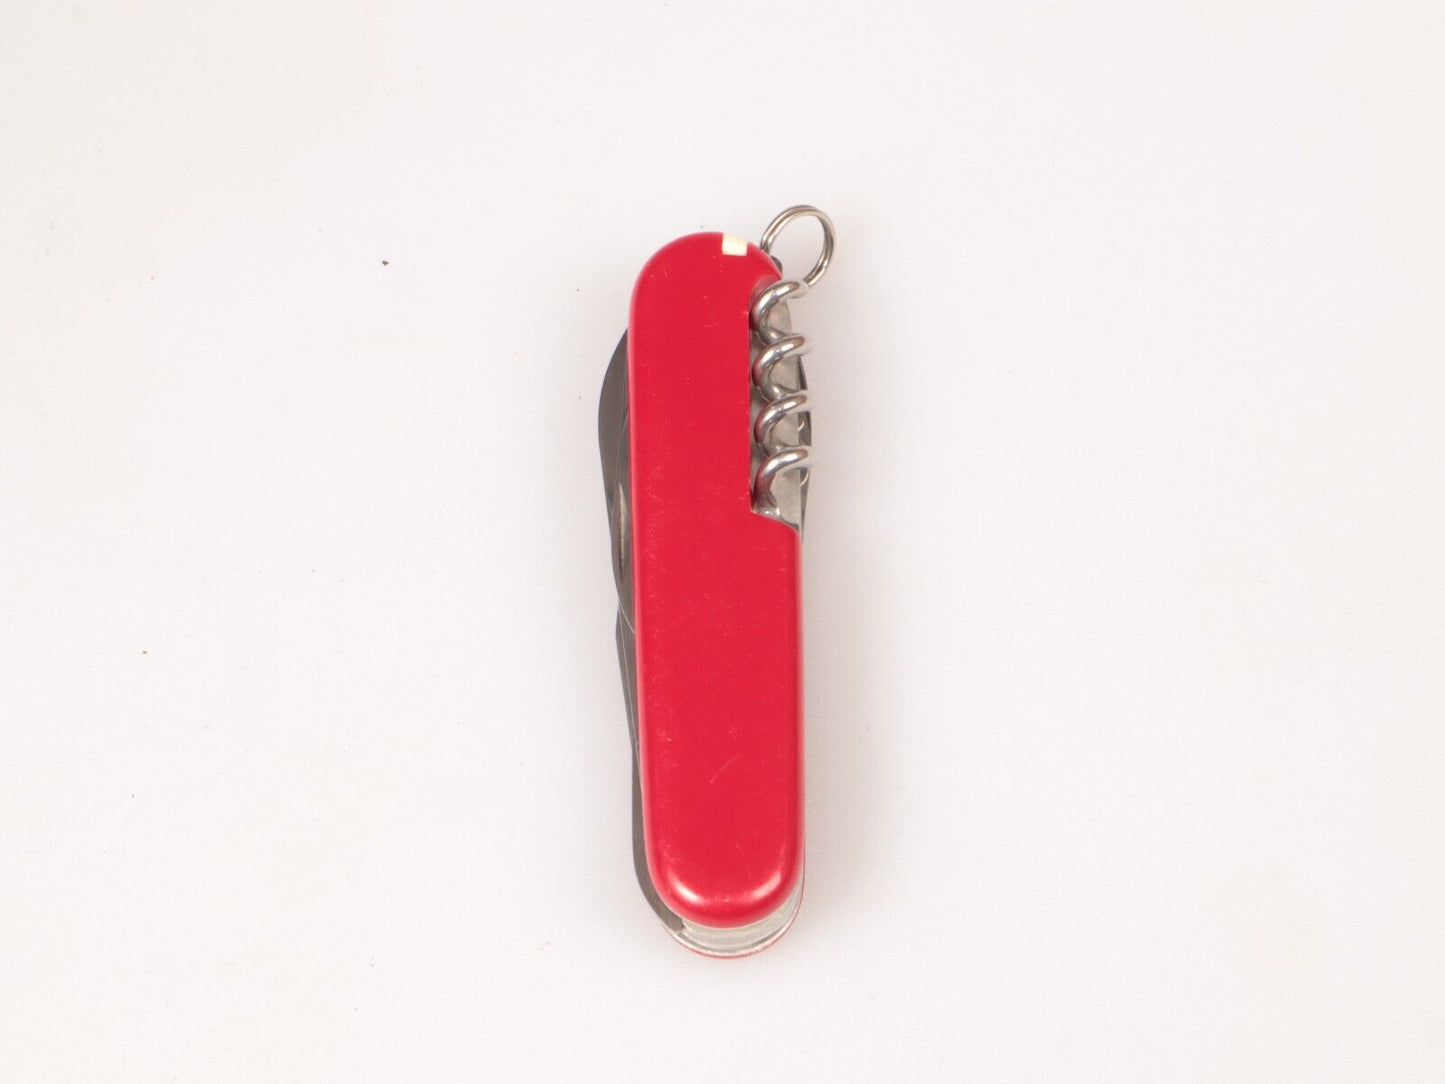 Victorinox Spartaanse Camping | Zwitsers zakmes | Rood | 91 mm | 1,3603 | (13) 